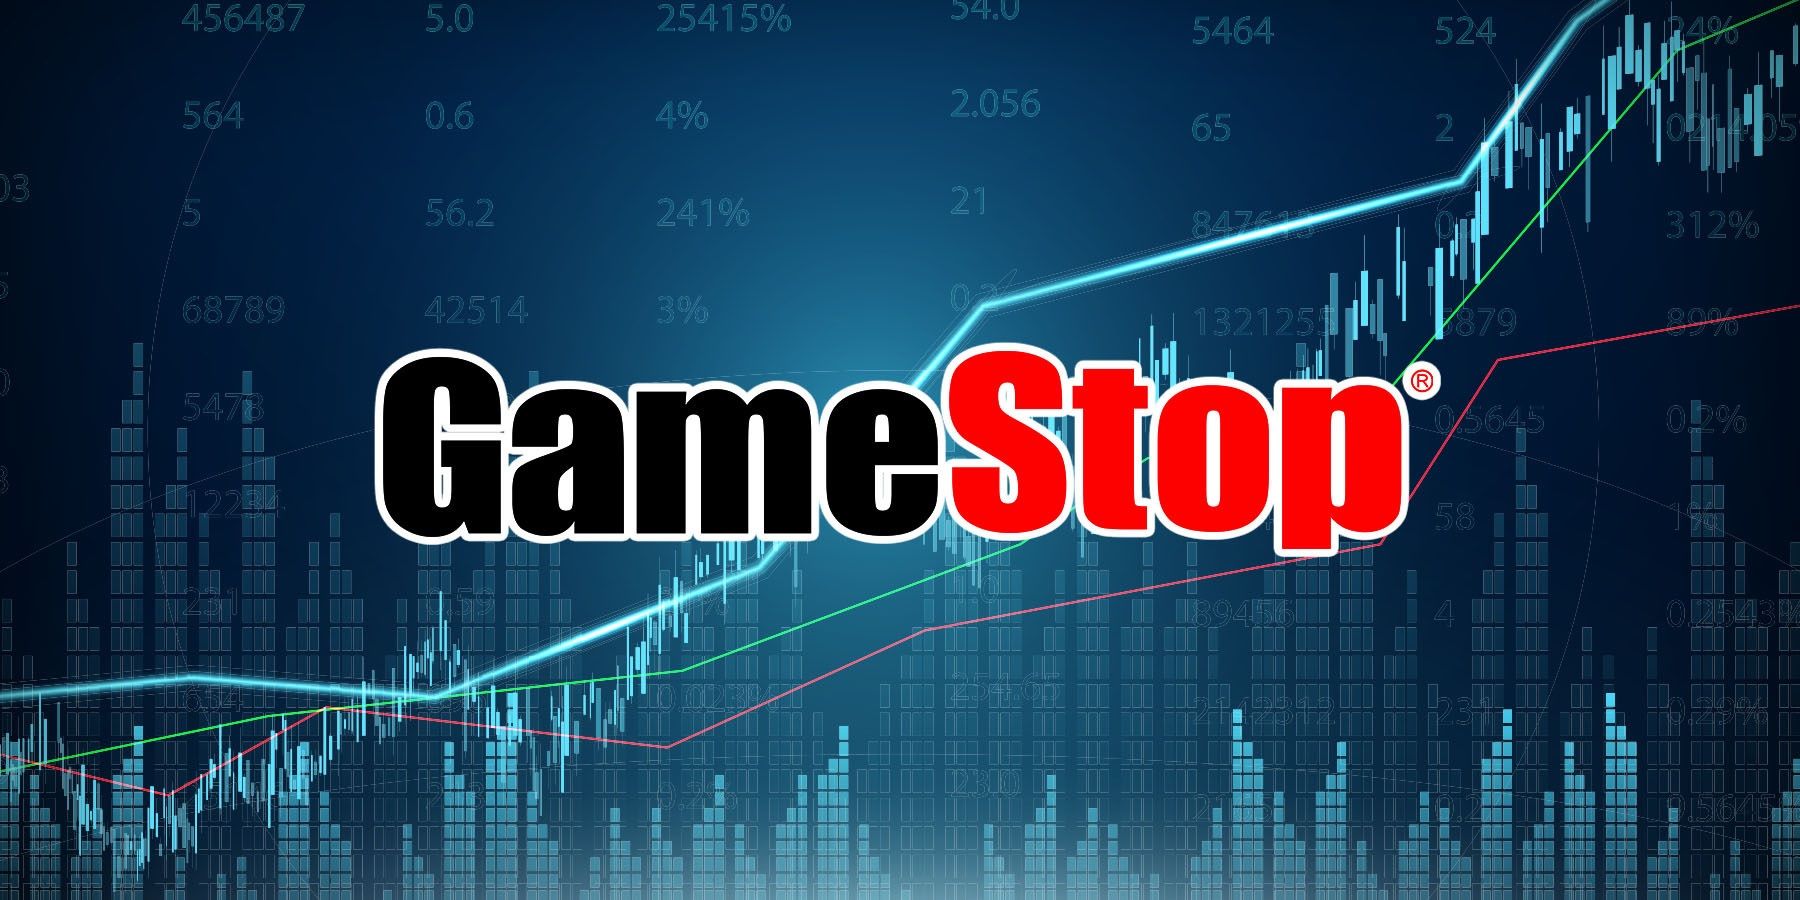 GameStop Stock Price is Spiking Right Now